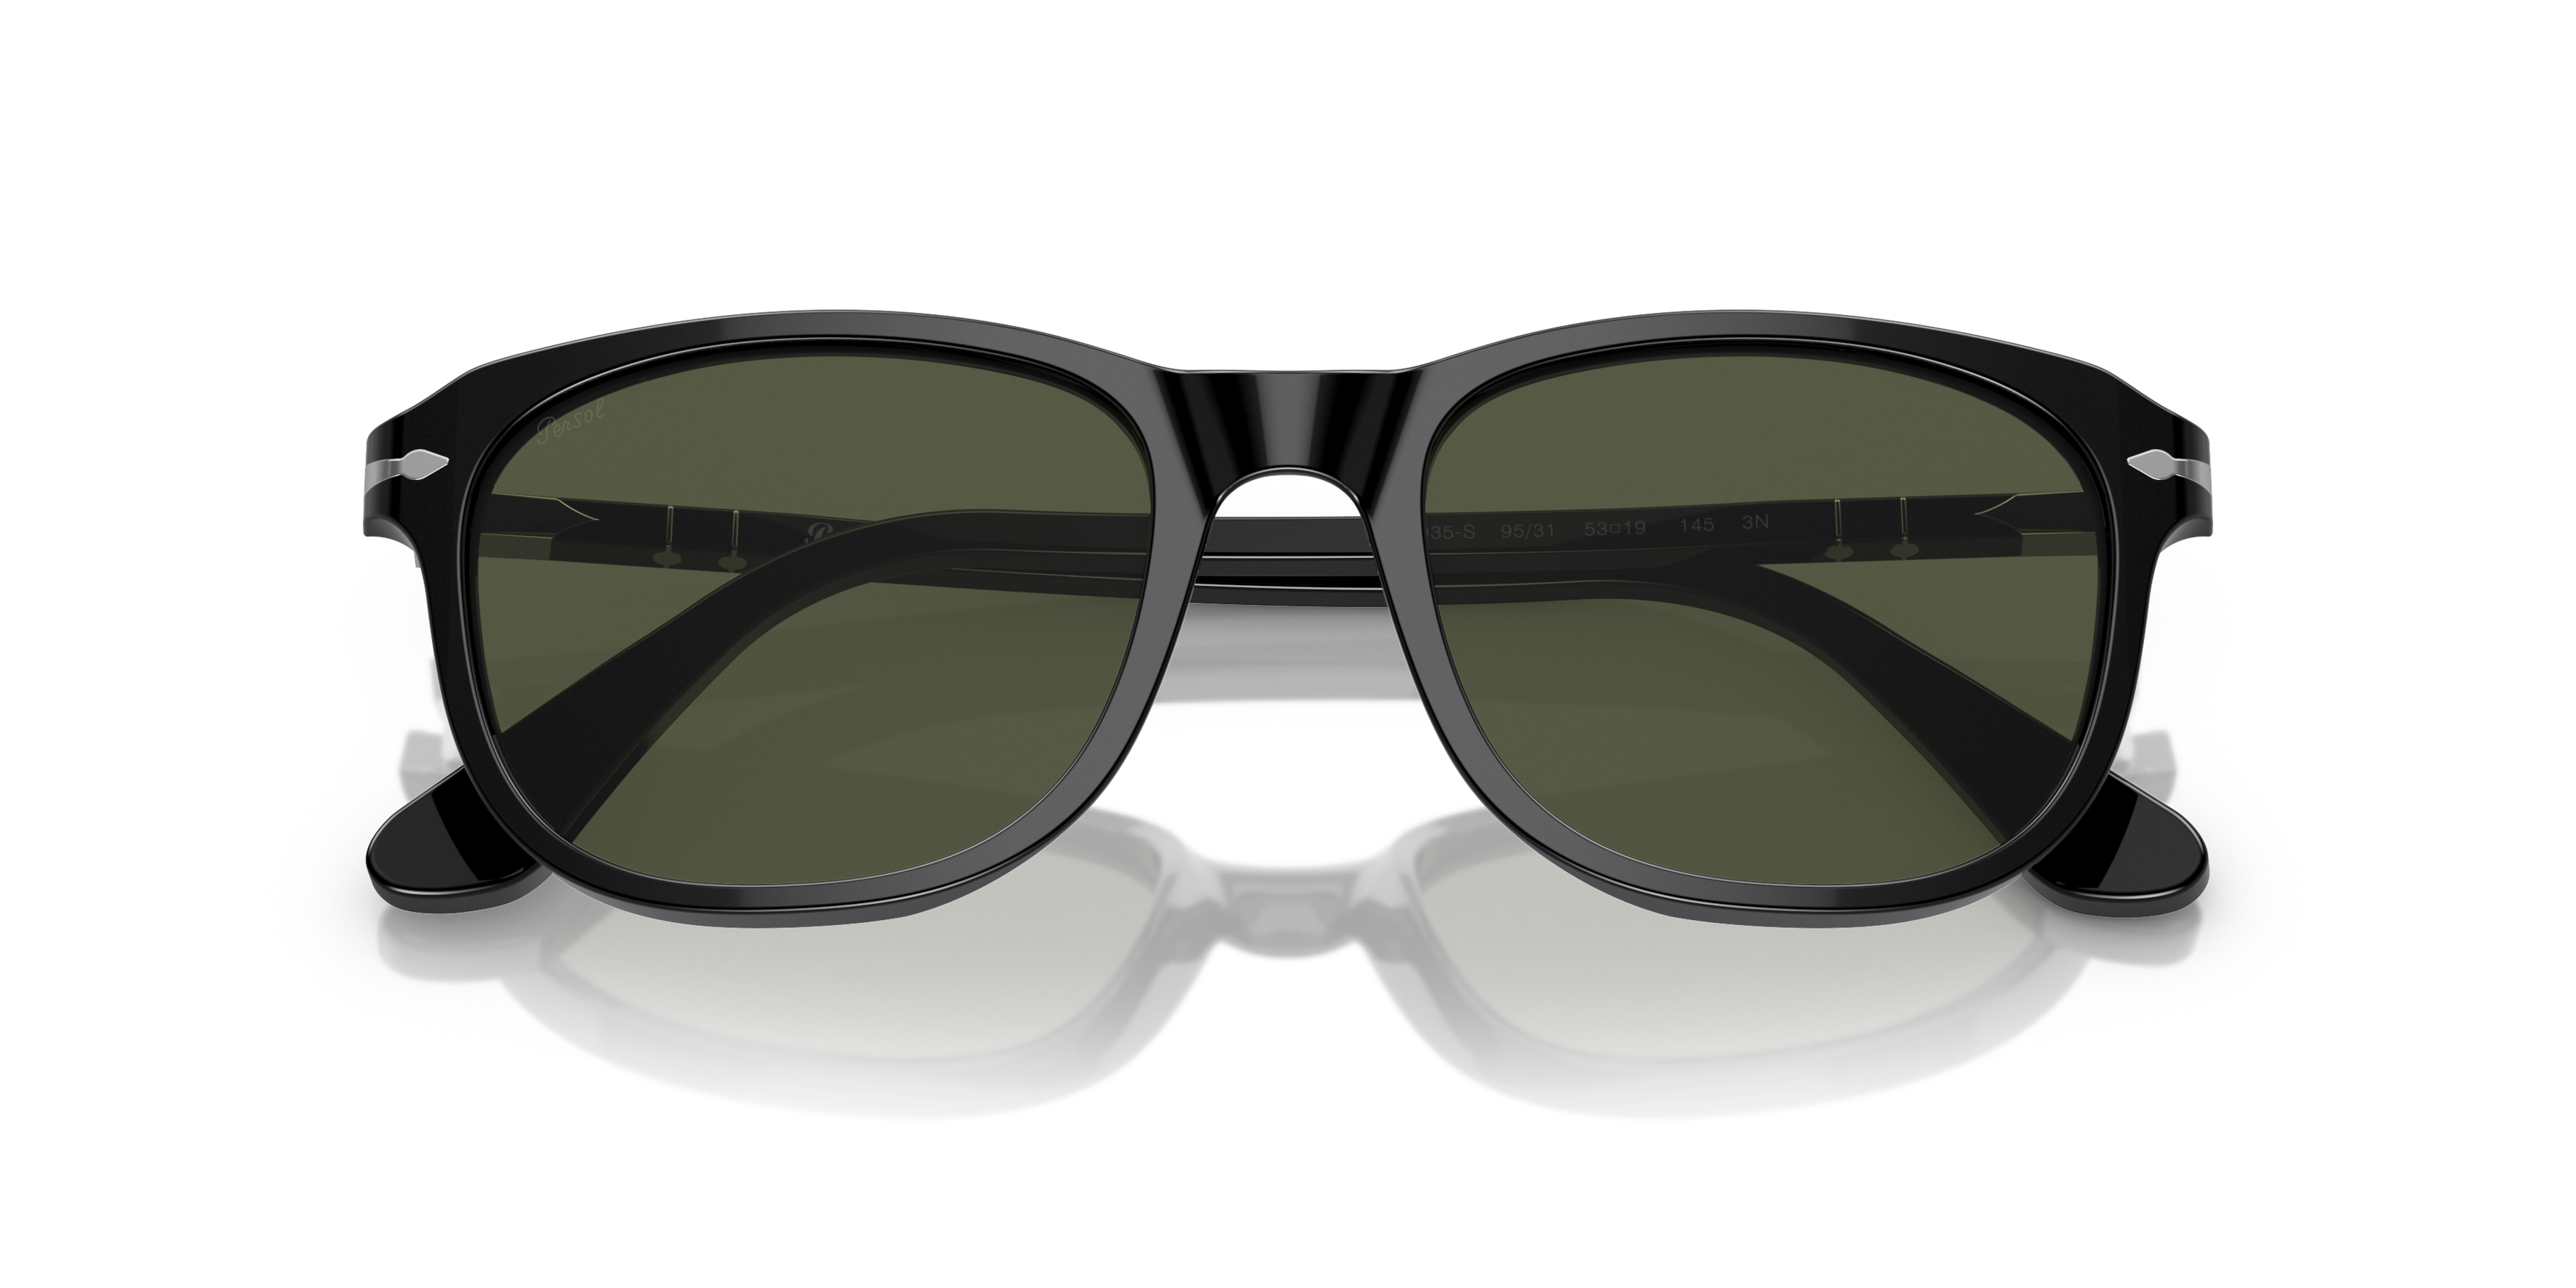 [products.image.folded] Persol 0PO1935S 95/31